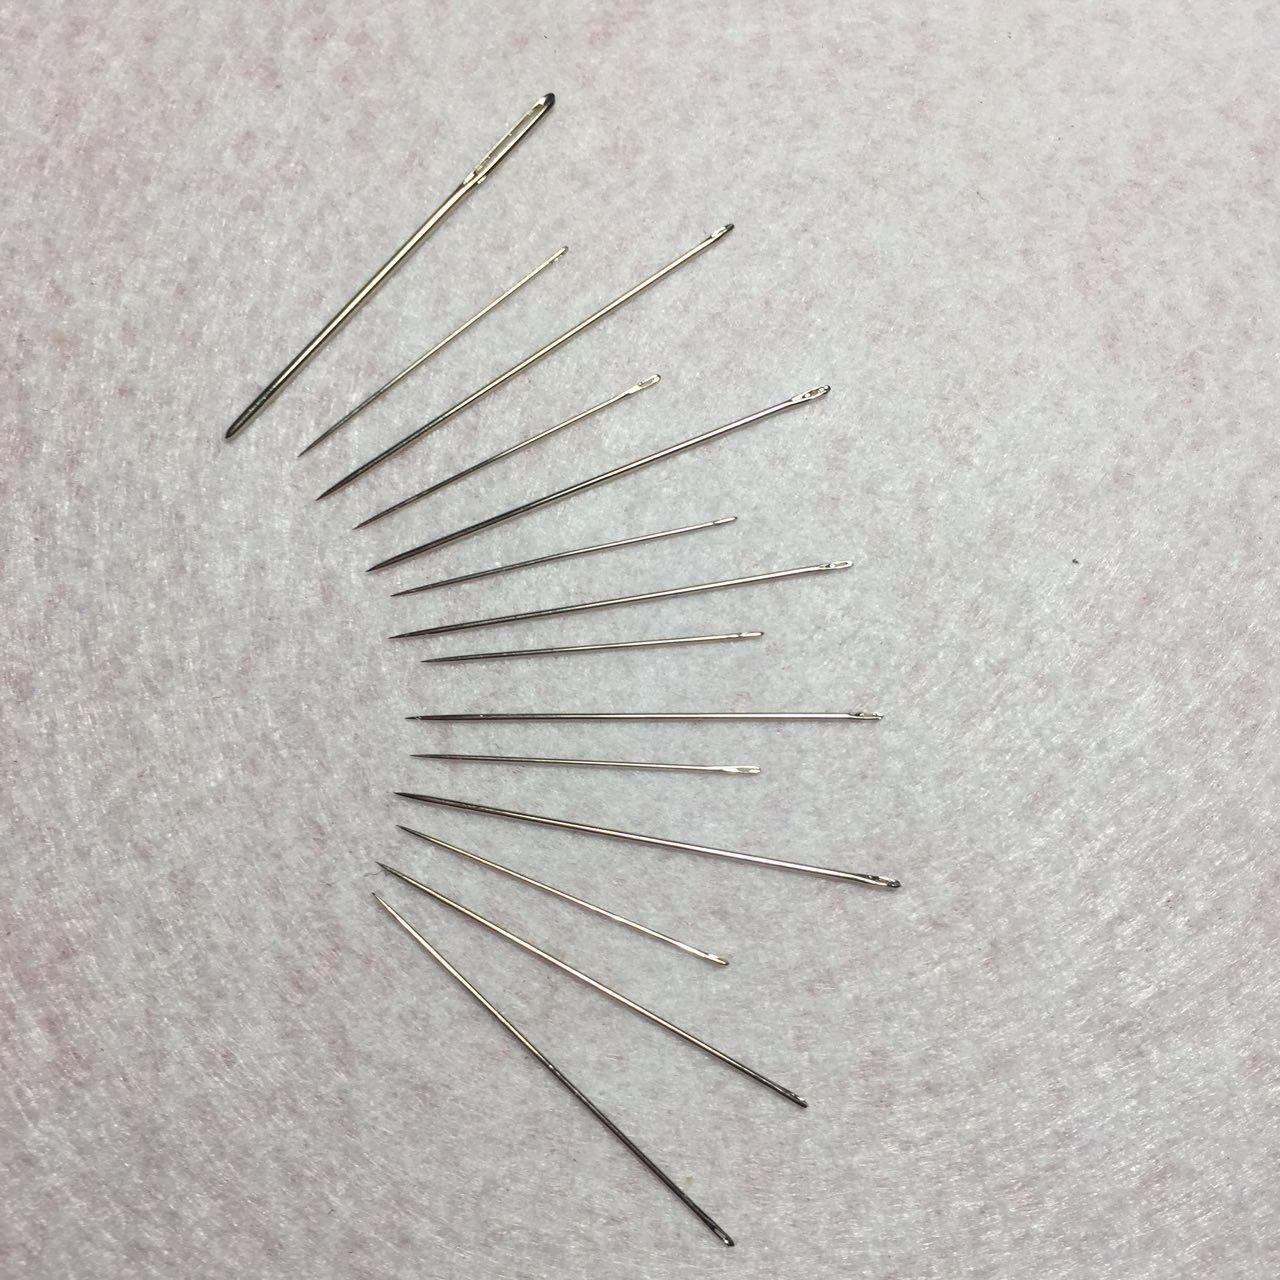 Needles for manual sewing